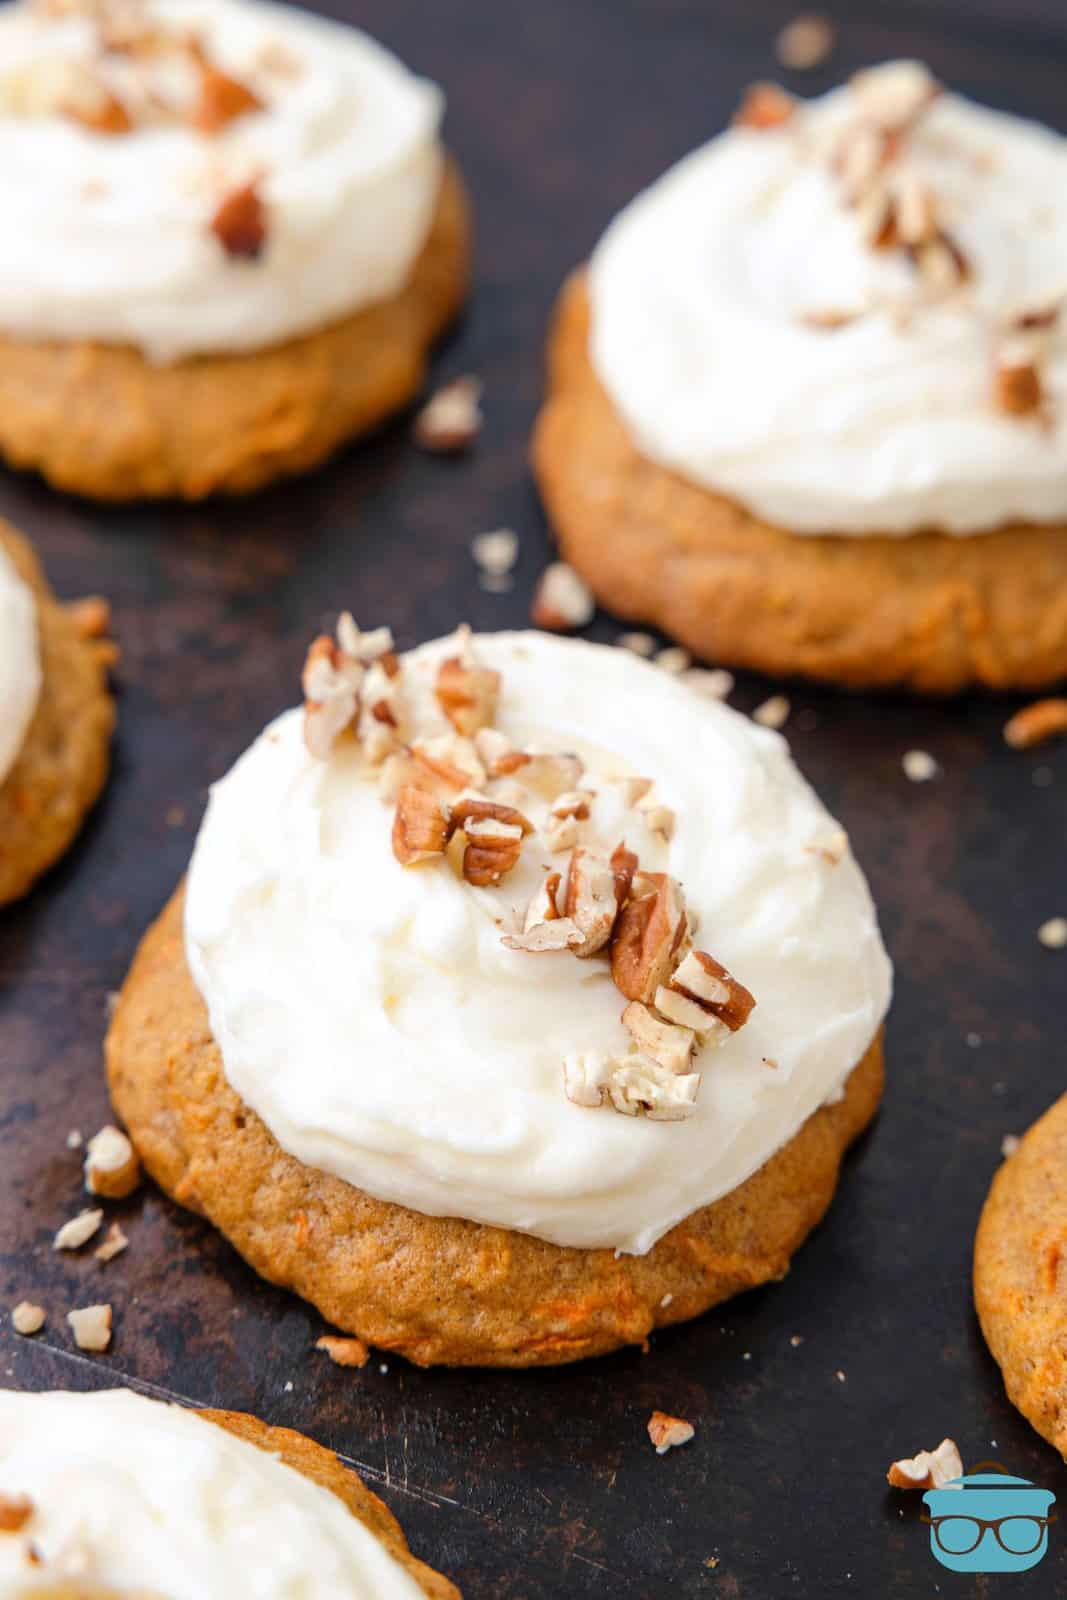 Looking down on a few Carrot Cake cookies with frosting and chopped nuts.